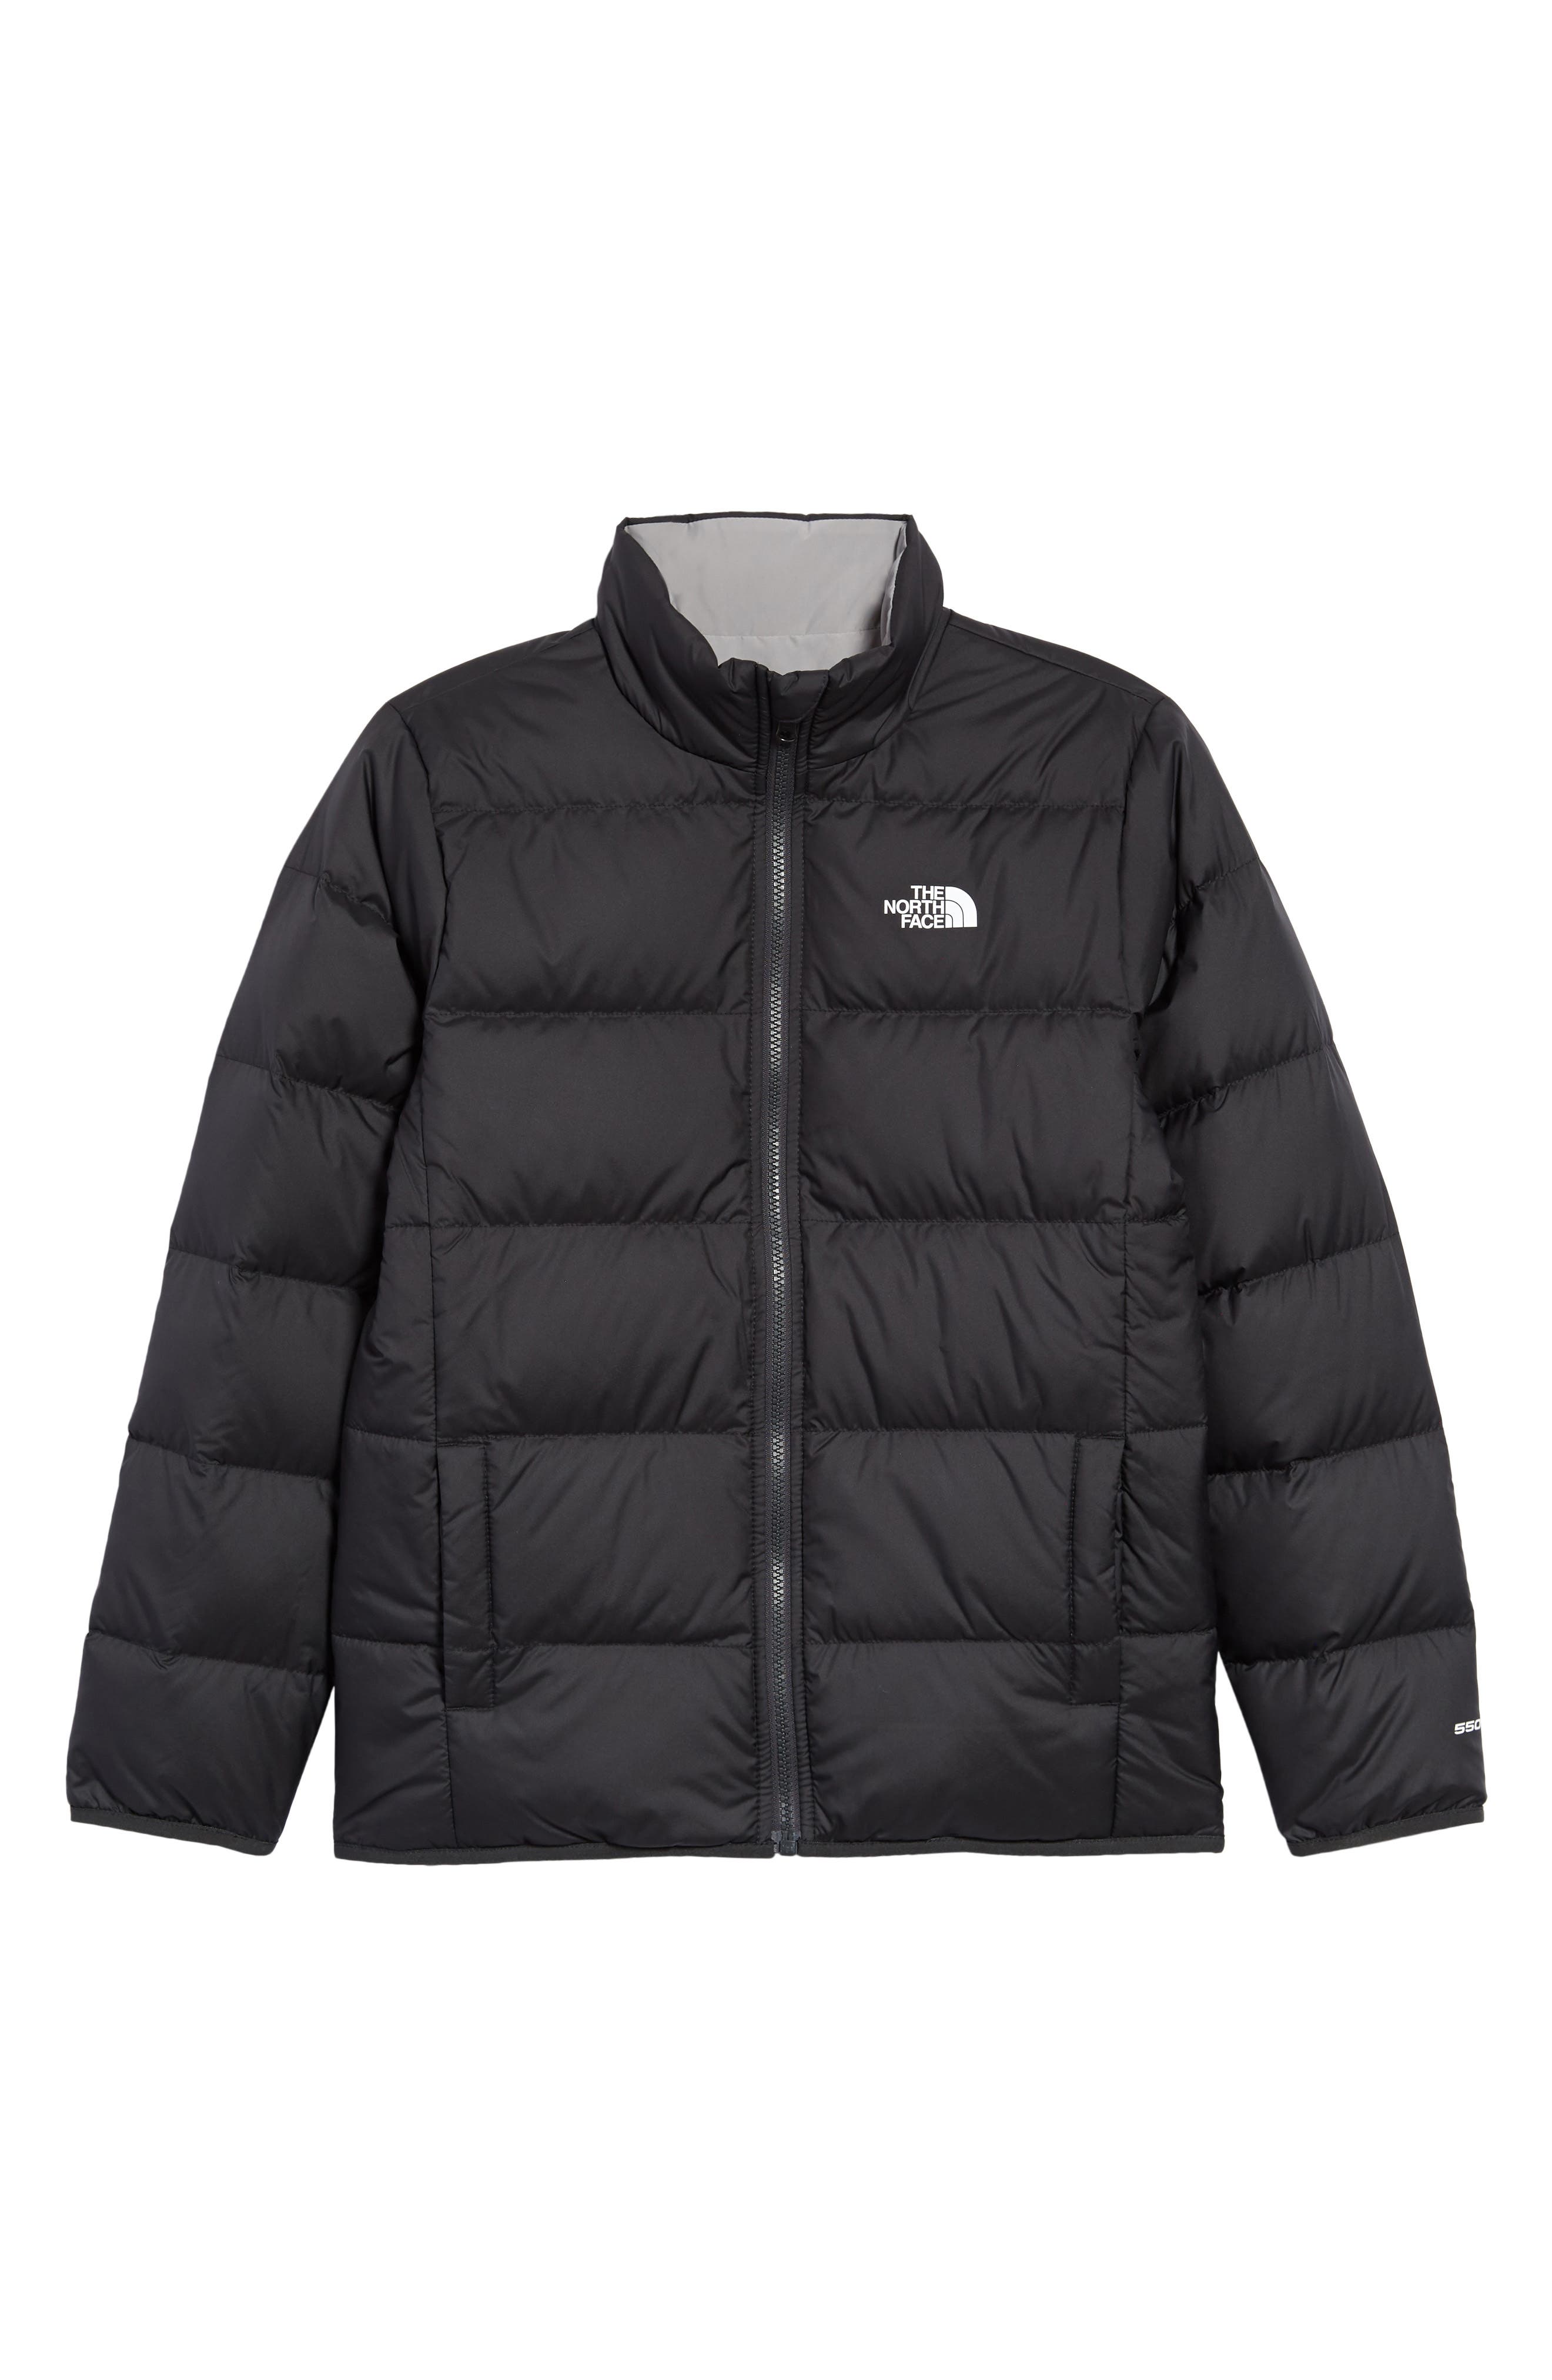 north face female sizes